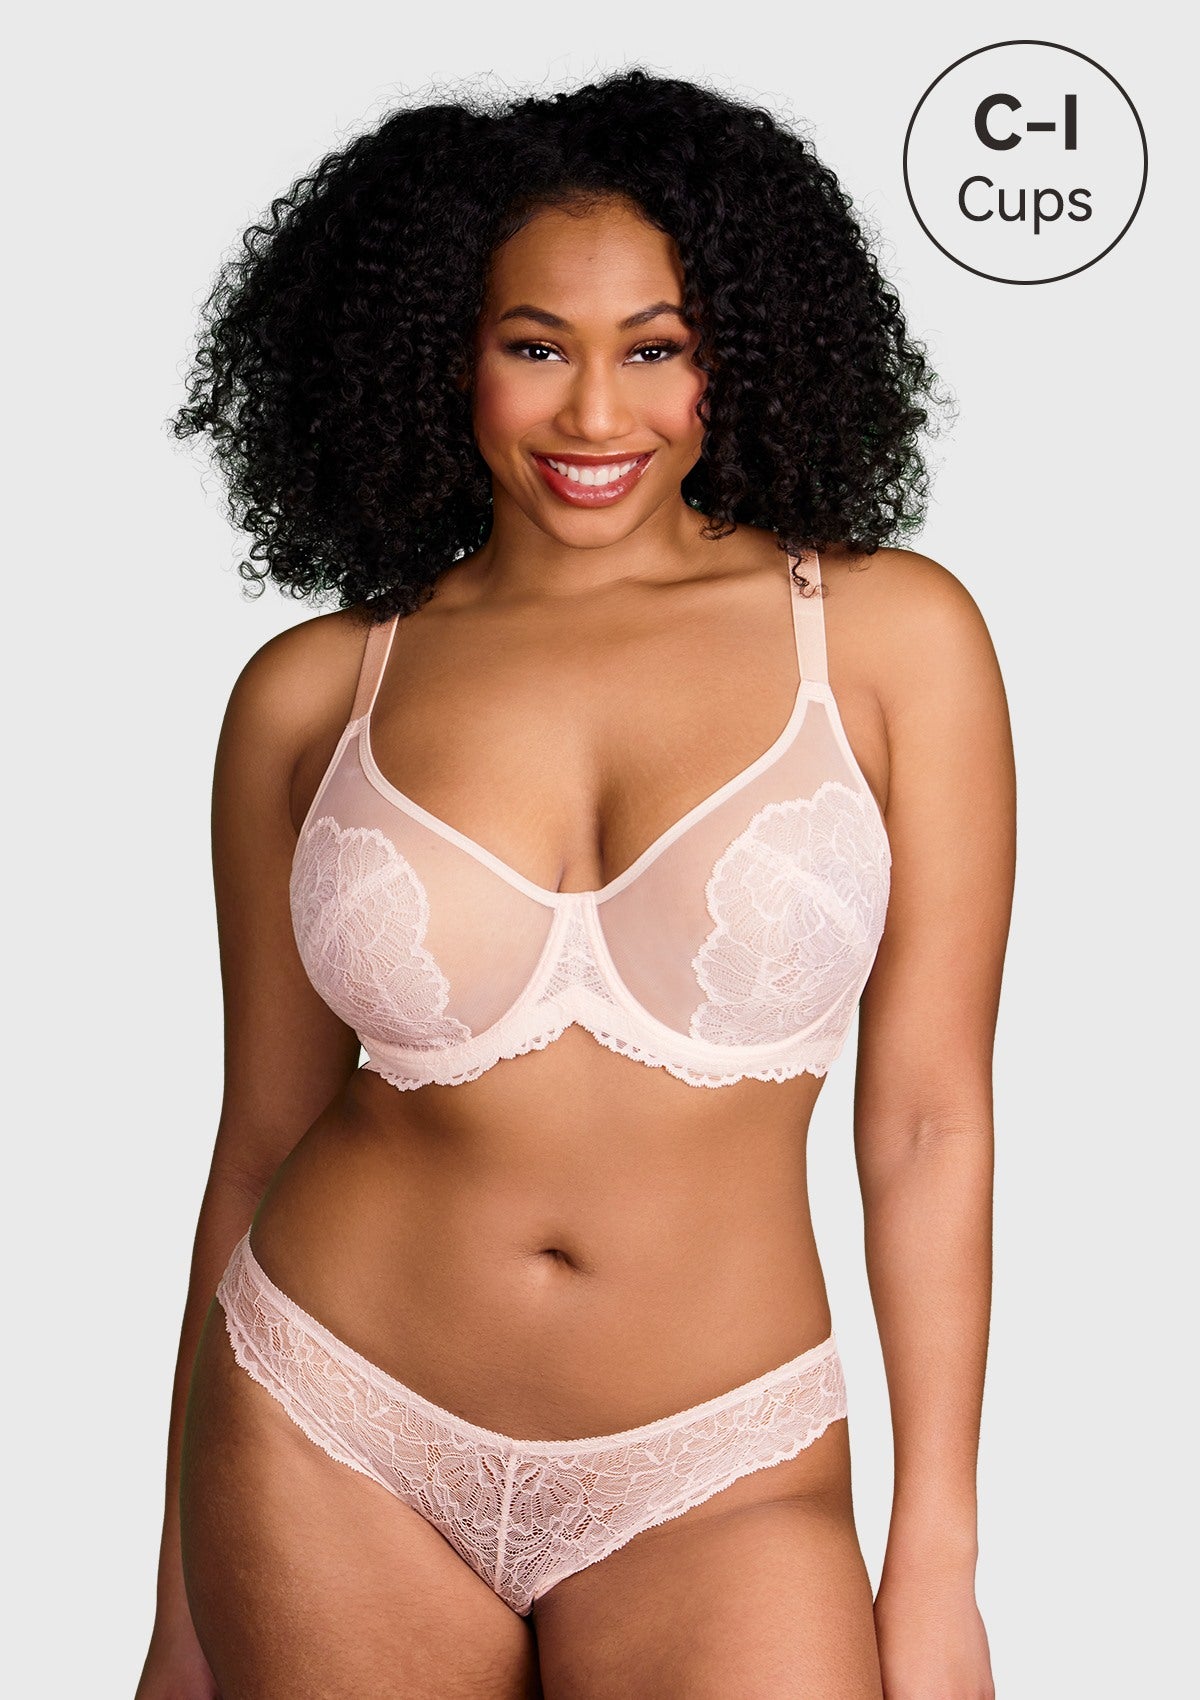 HSIA Blossom Sheer Lace Bra: Comfortable Underwire Bra For Big Busts - Dusty Peach / 42 / D